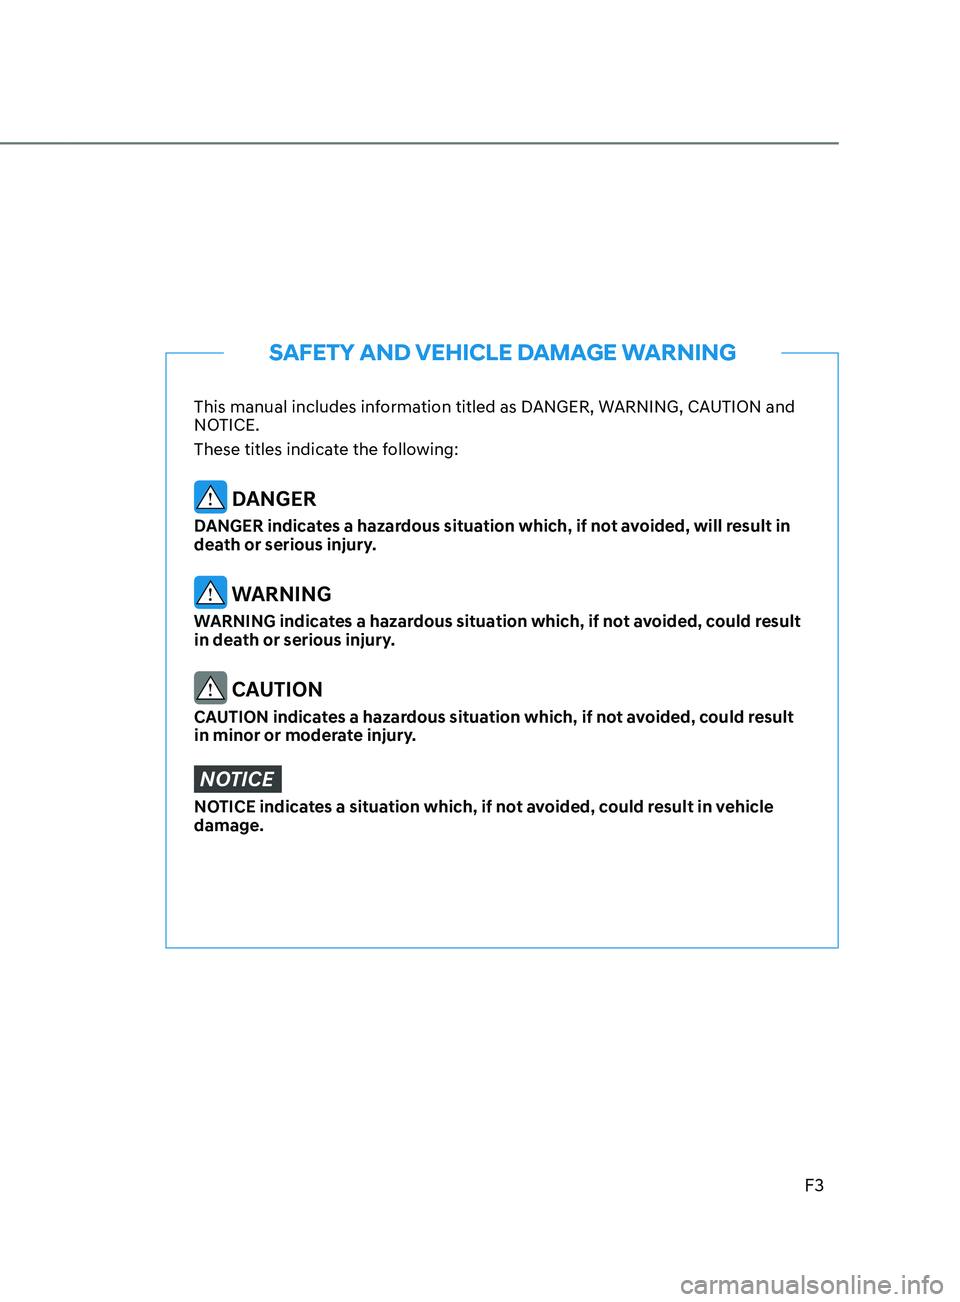 HYUNDAI SANTA FE LIMITED 2021  Owners Manual F3
This manual includes information titled as DANGER, WARNING, CAUTION and 
NOTICE.
These titles indicate the following:
 DANGER
DANGER indicates a hazardous situation which, if not avoided, will resu